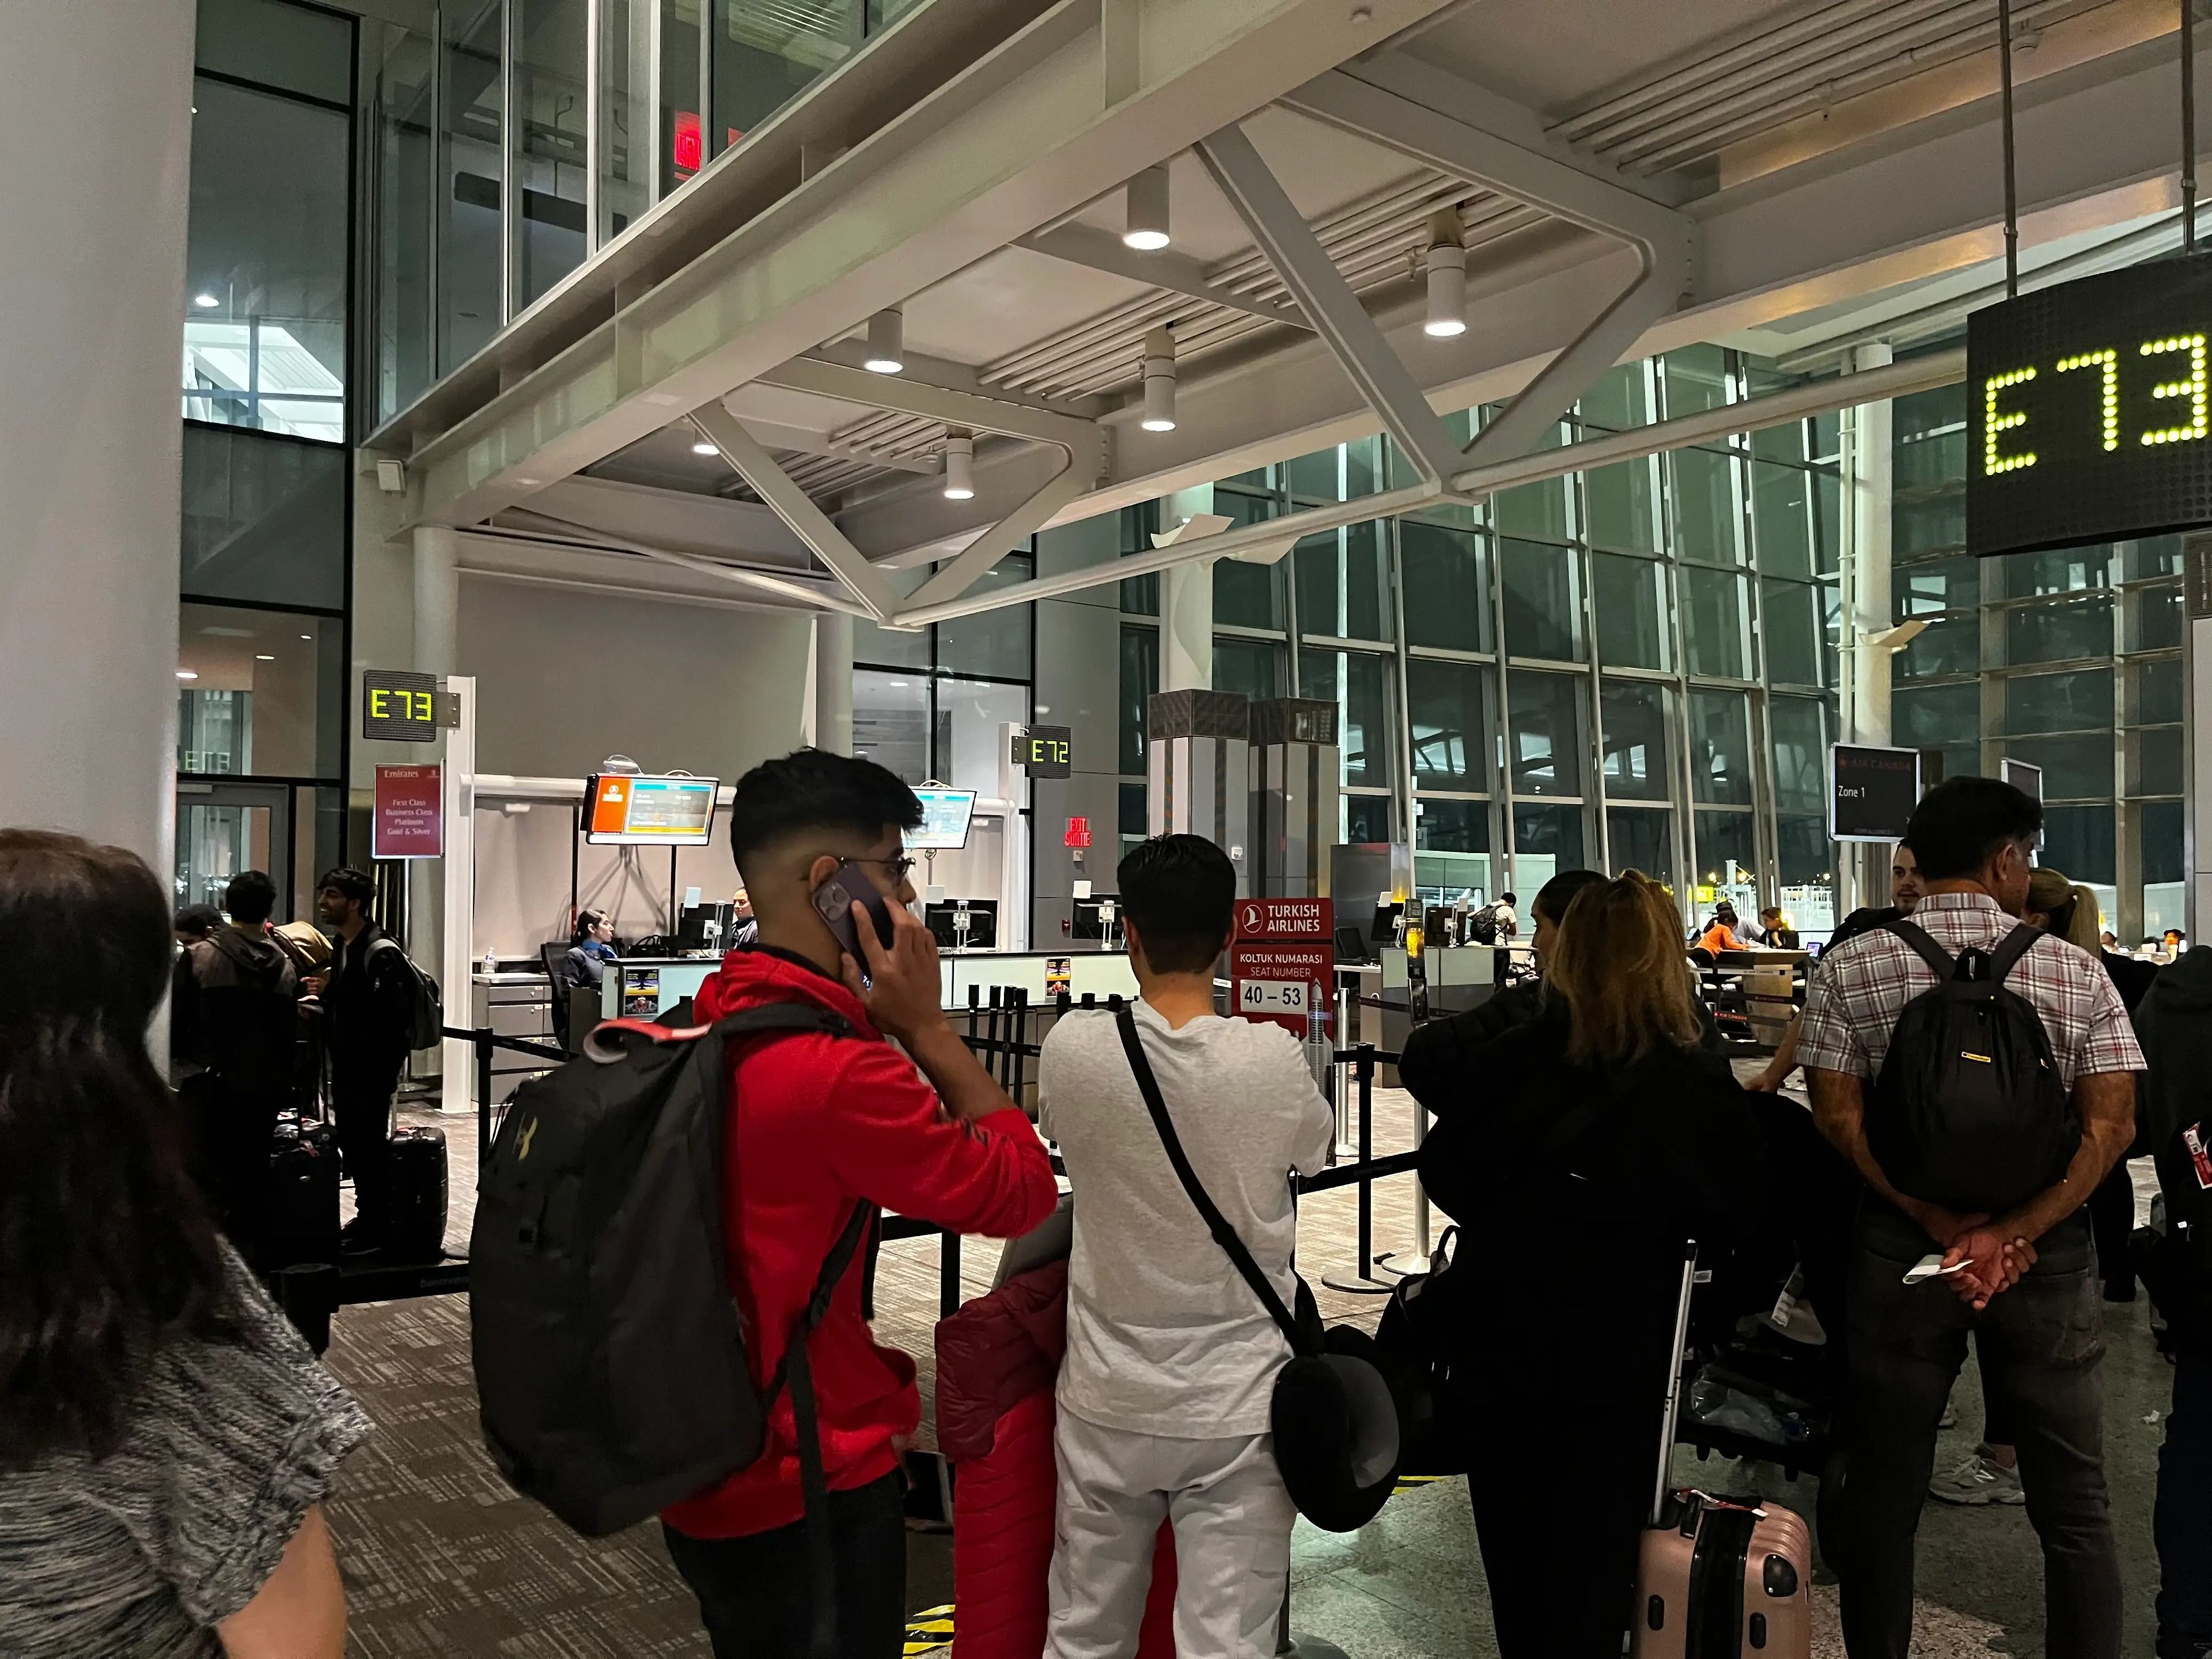 A line of people waiting to board in an airport with a man wearing a red shirt on the phone in foreground.